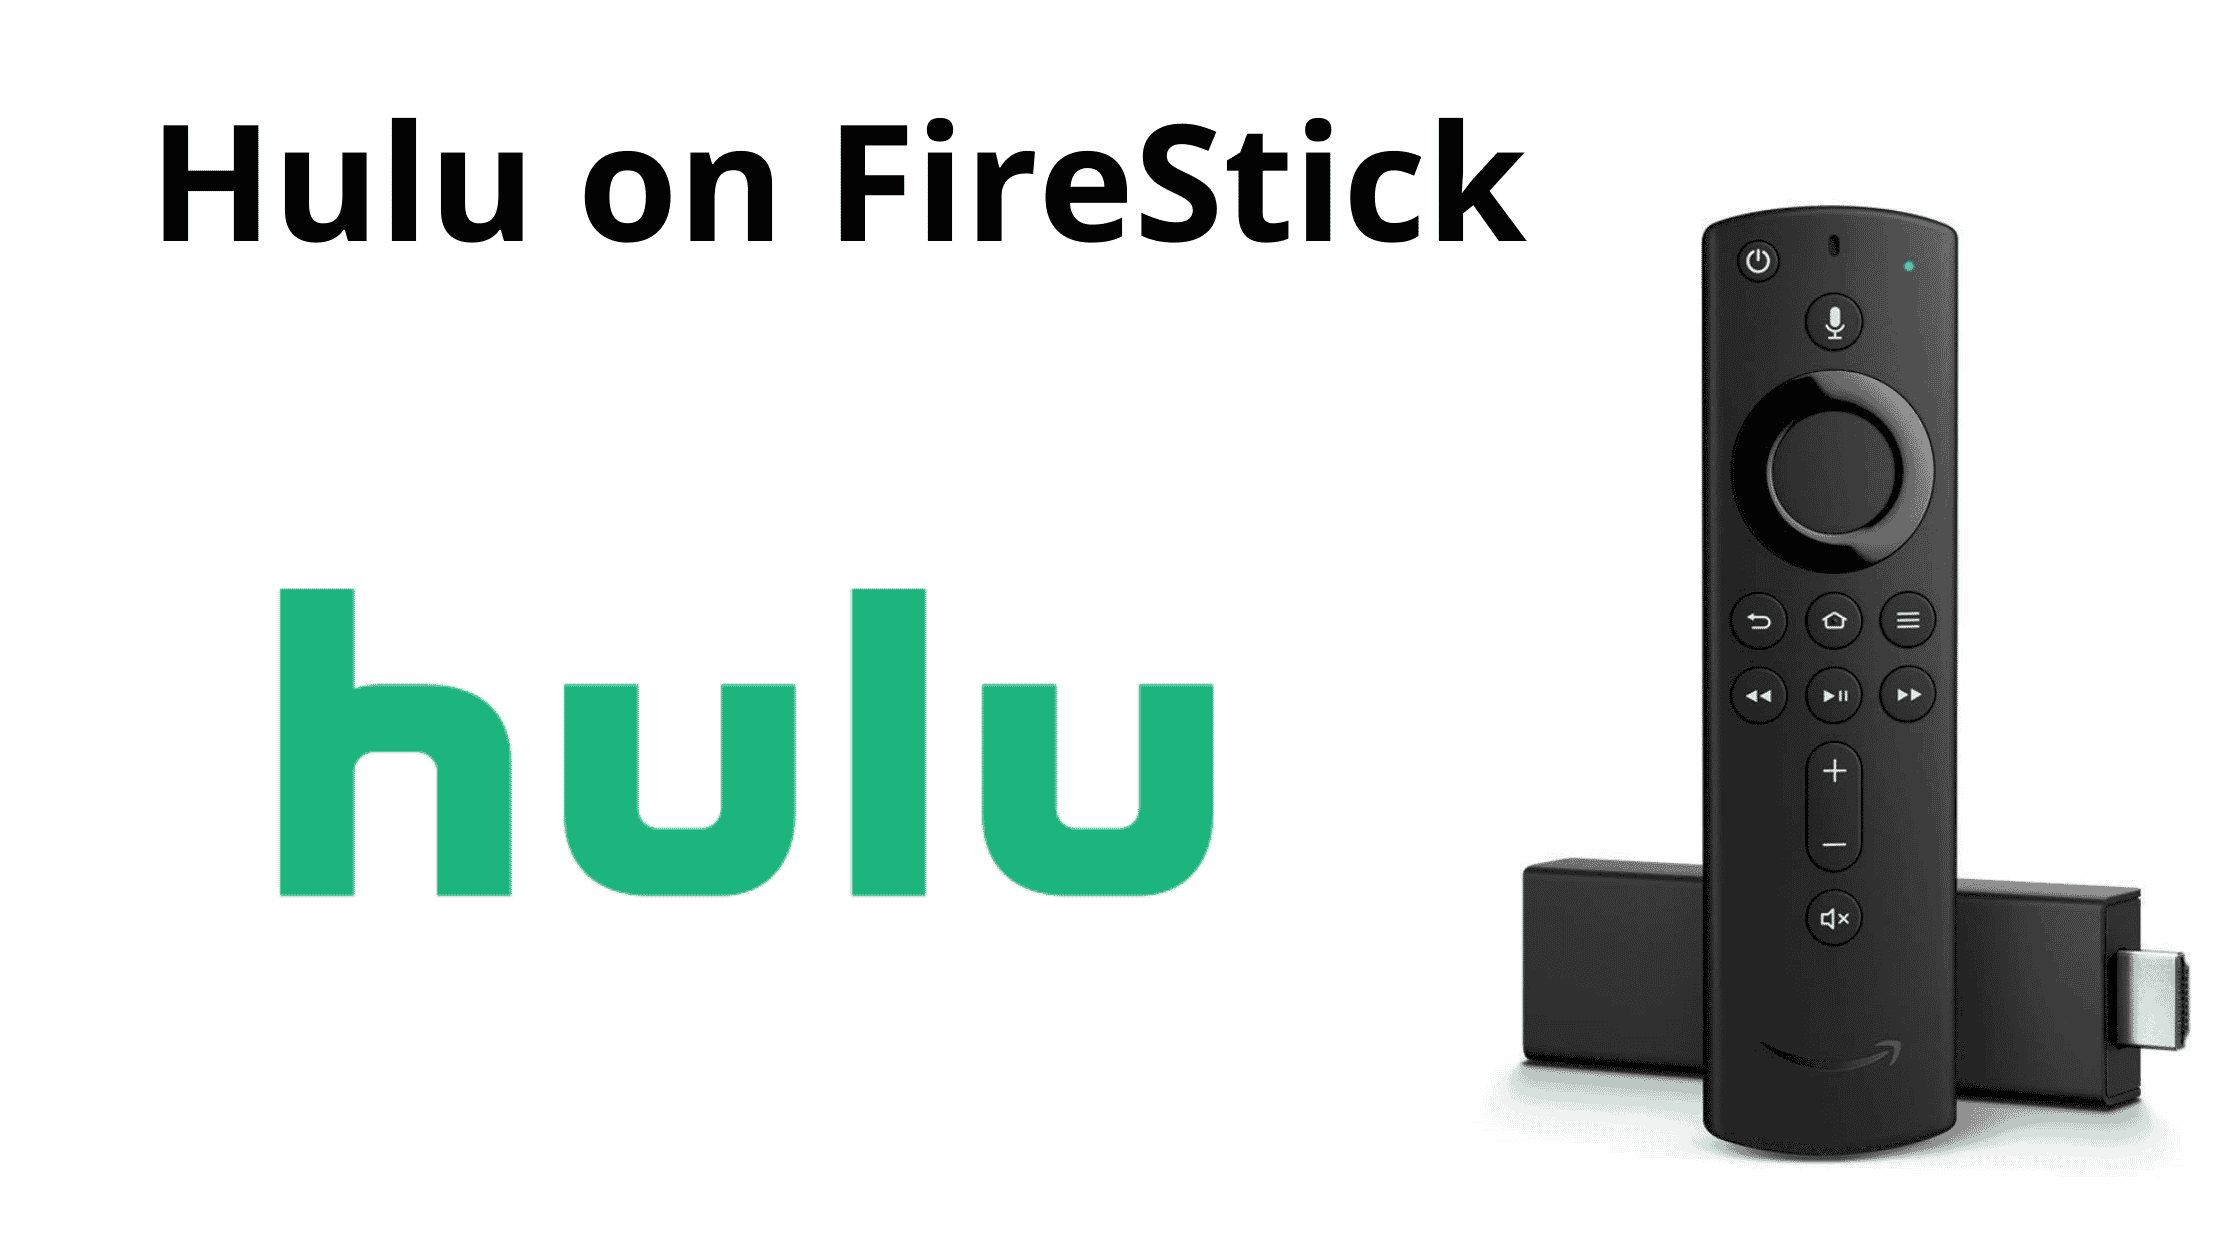 How to Download Hulu on Firestick